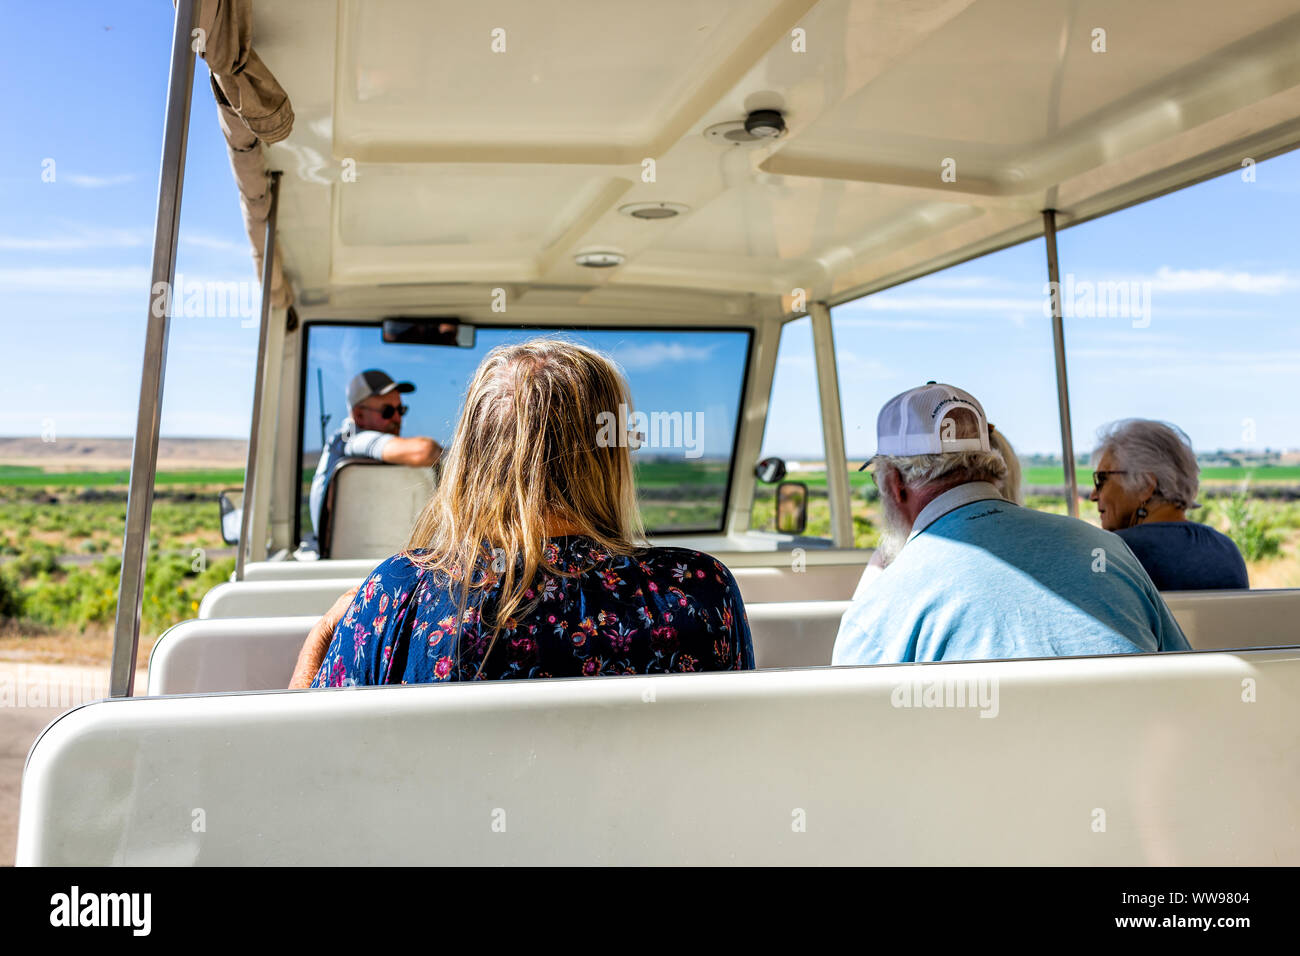 Jensen, USA - July 23, 2019: Outside Quarry visitor center in Dinosaur National Monument Park with people on shuttle to exhibit hall in Utah Stock Photo